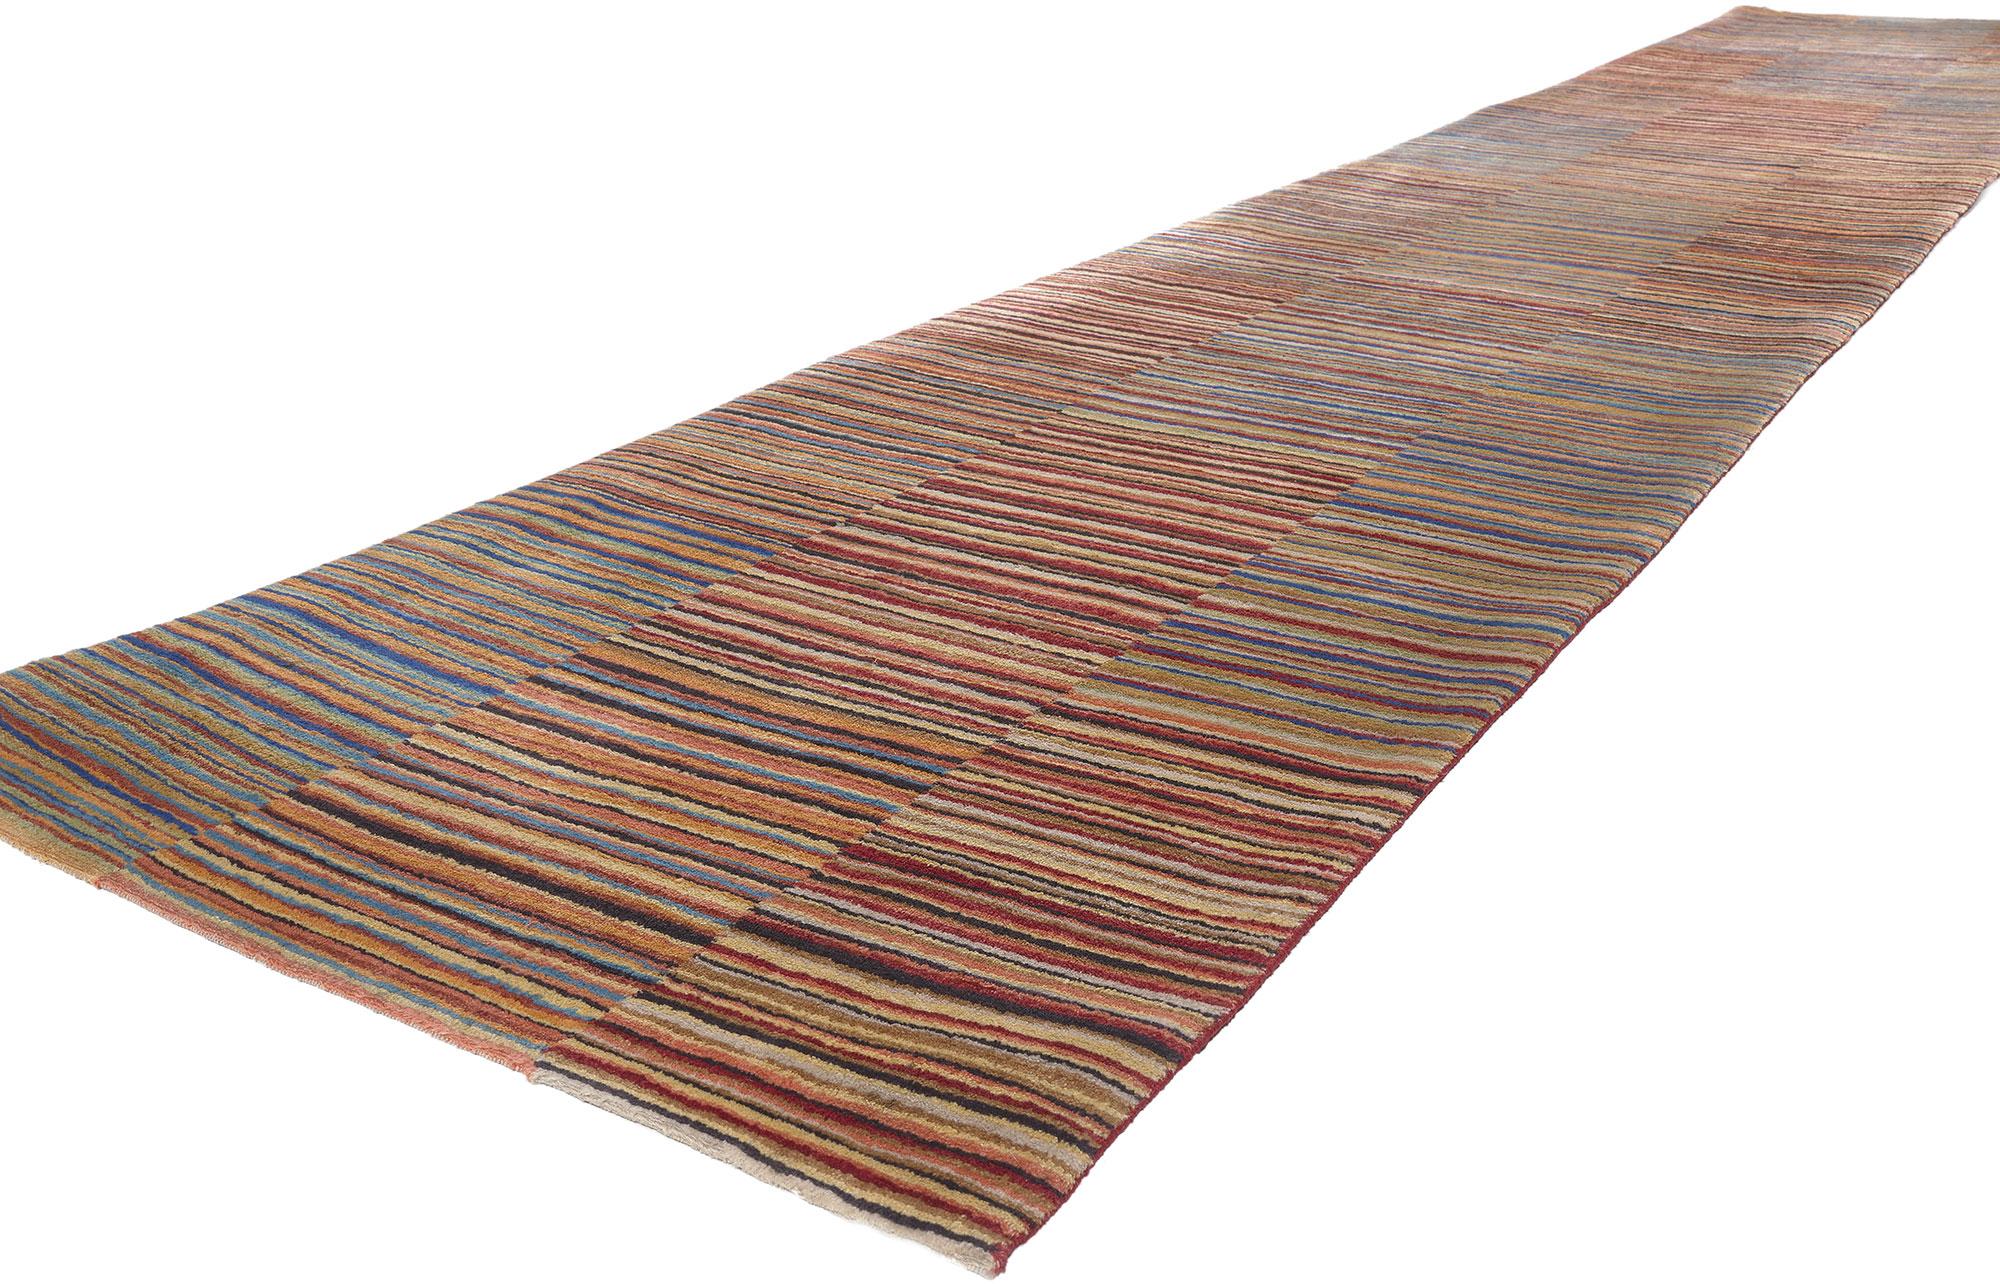 78534 Colorful Striped Tibetan Runner, 03'00 x 16'07.
Emanating classic style with incredible detail and texture, this colorful Tibetan runner is a captivating vision of woven beauty. The show-stopping striped pattern and full spectrum of happy hues